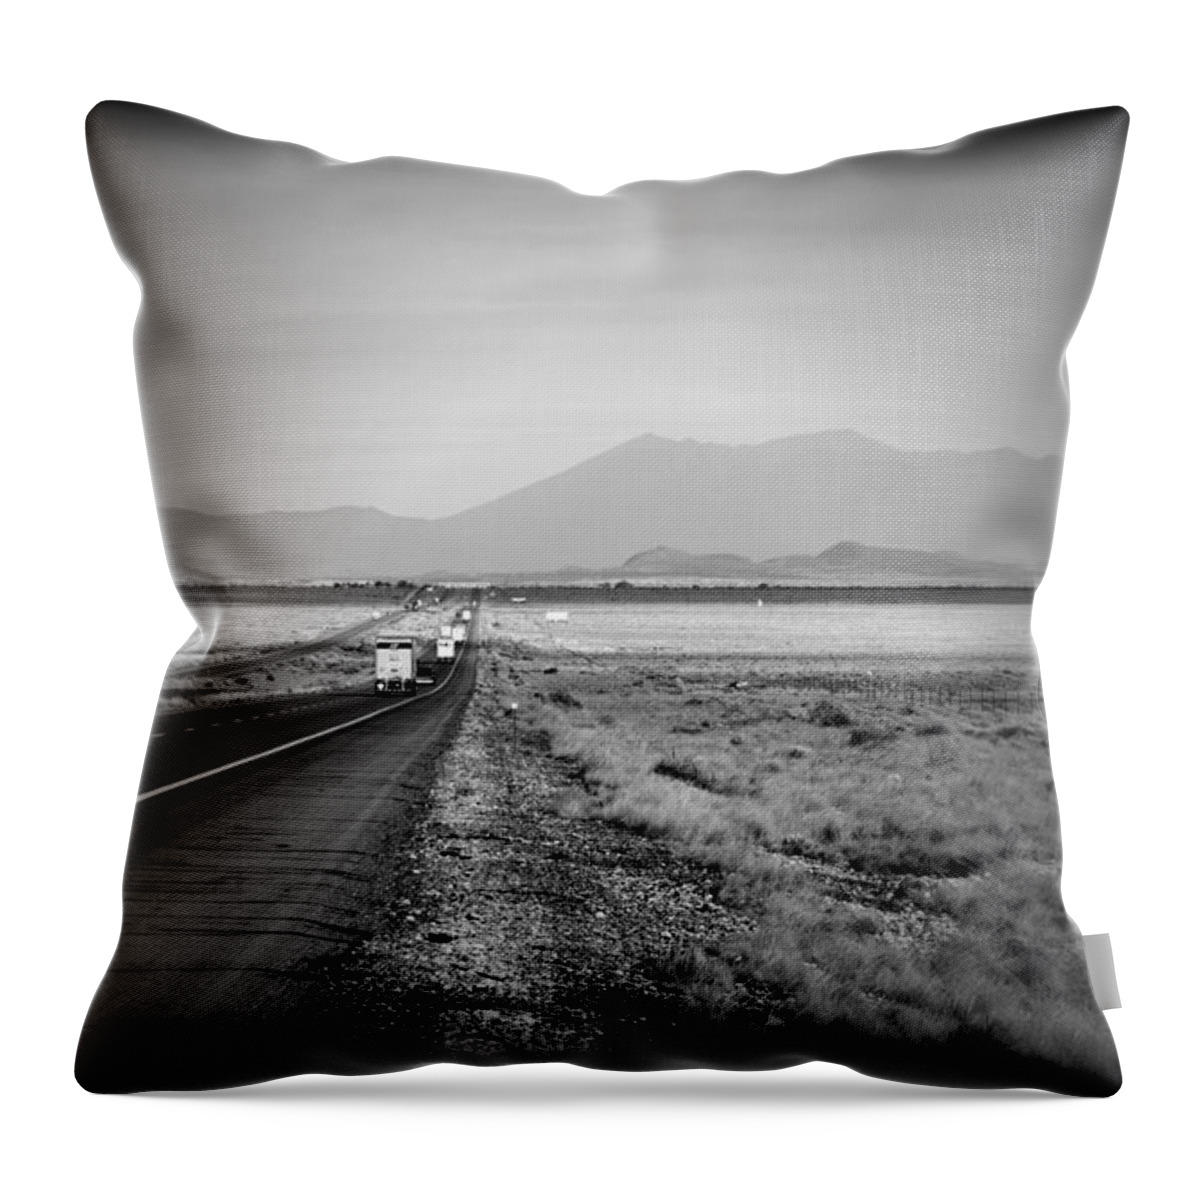 Flagstaff Throw Pillow featuring the photograph West To Flagstaff by Ricky Barnard